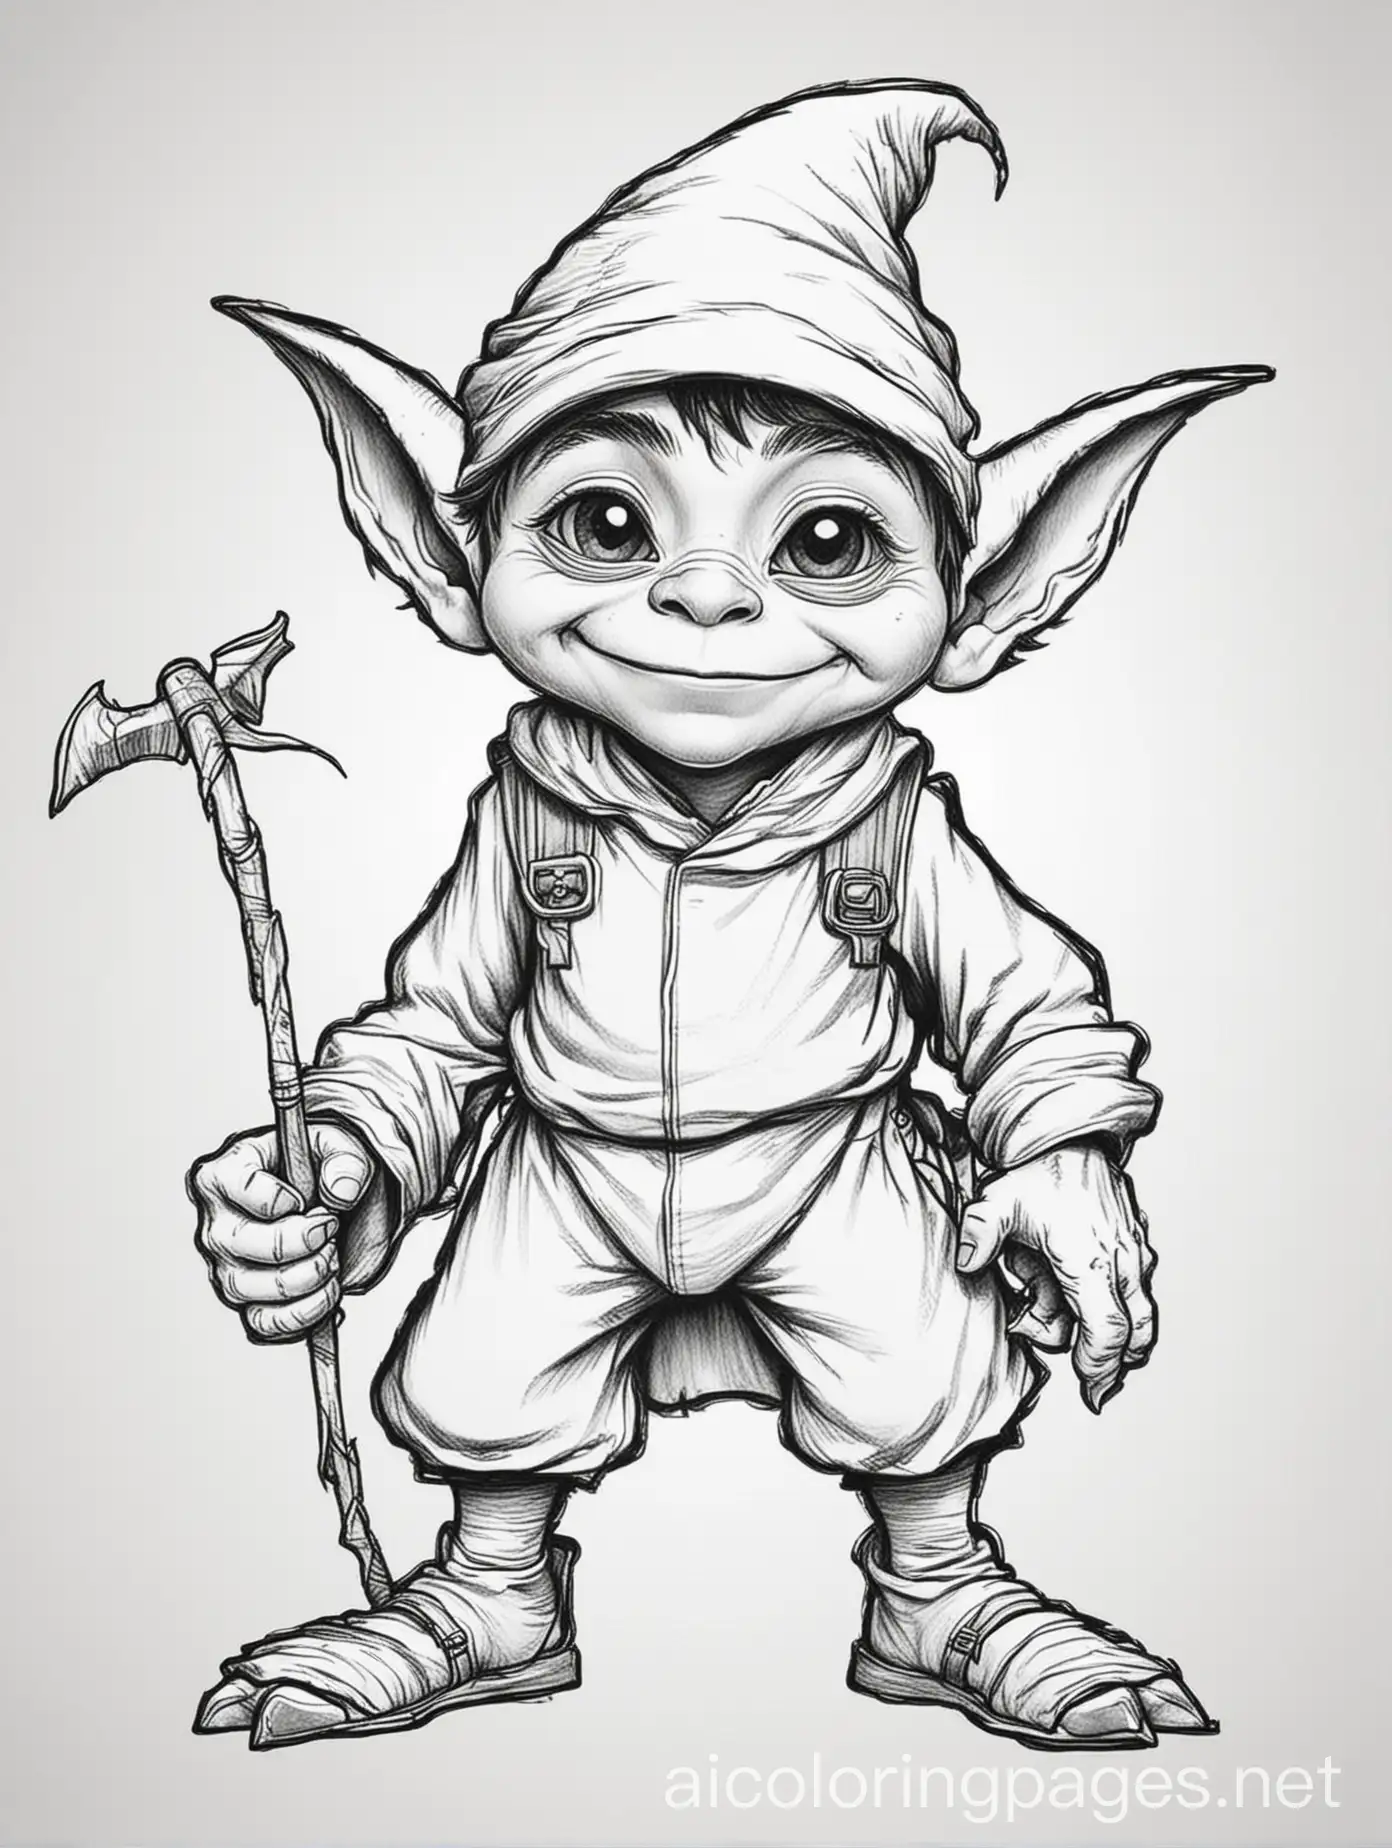 goblin, Coloring Page, black and white, line art, white background, Simplicity, Ample White Space. The background of the coloring page is plain white to make it easy for young children to color within the lines. The outlines of all the subjects are easy to distinguish, making it simple for kids to color without too much difficulty